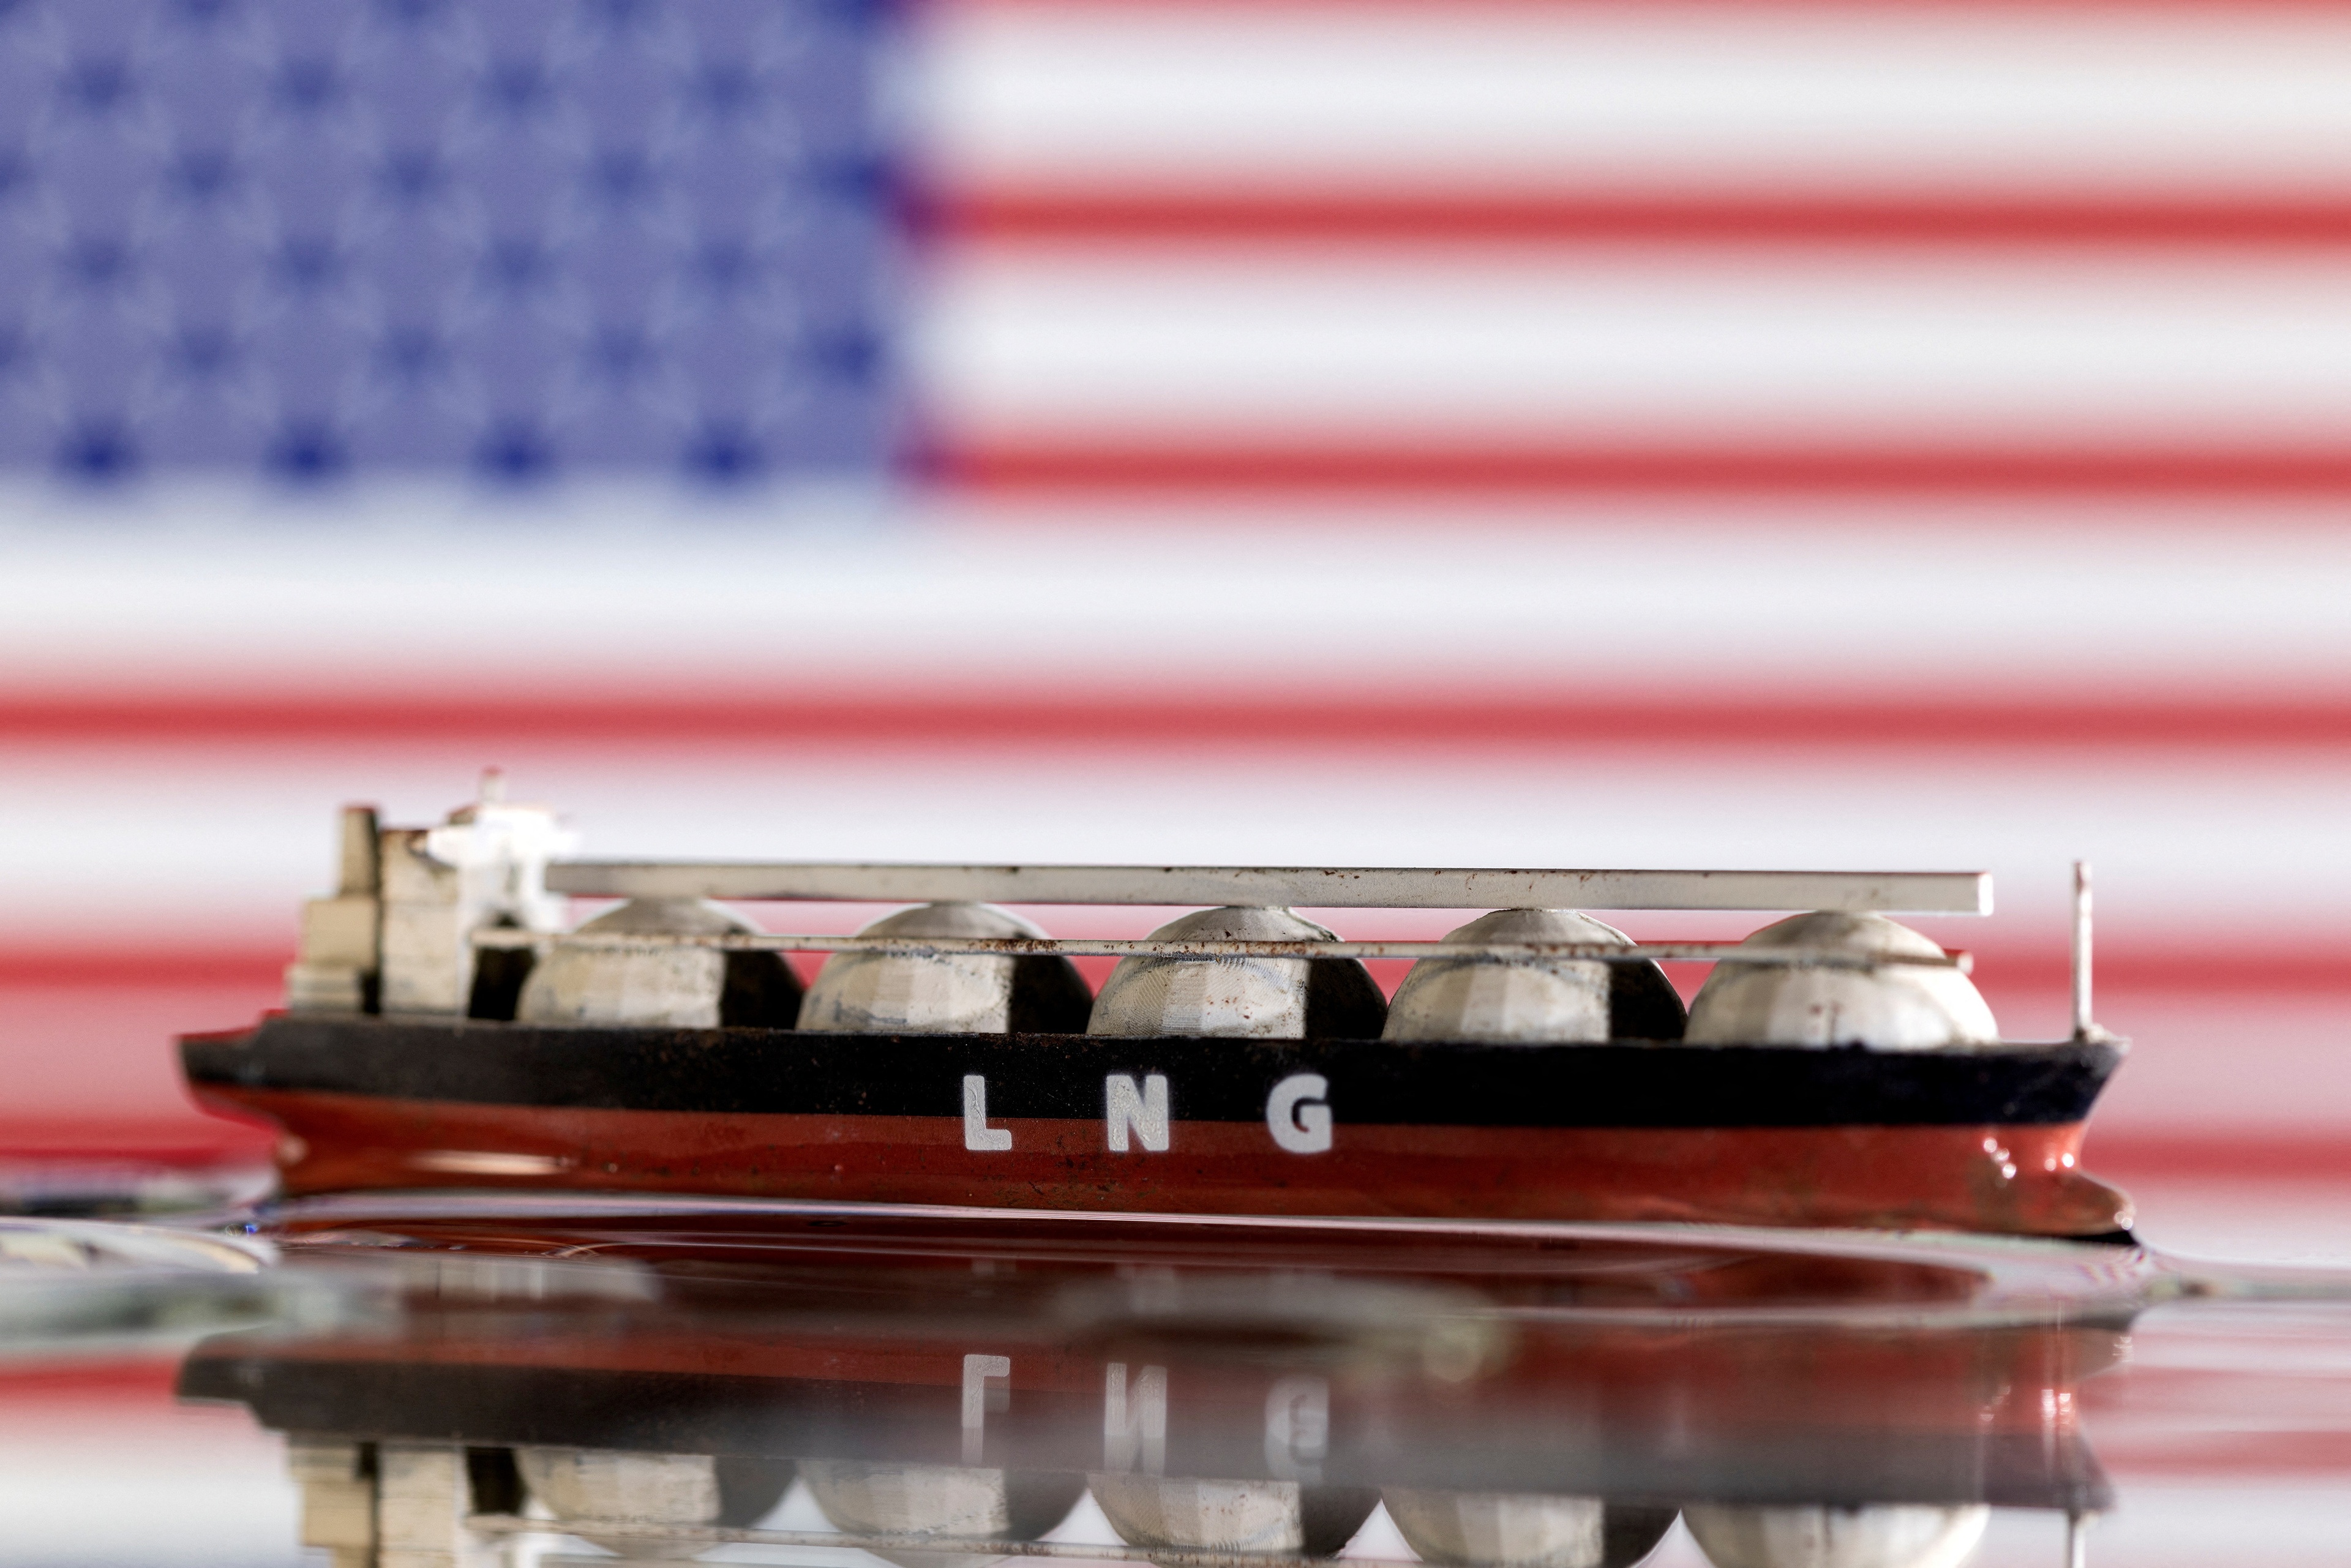 FILE PHOTO: Model of LNG tanker is seen in front of the U.S. flag in this illustration taken May 19, 2022. REUTERS/Dado Ruvic/Illustration/File Photo